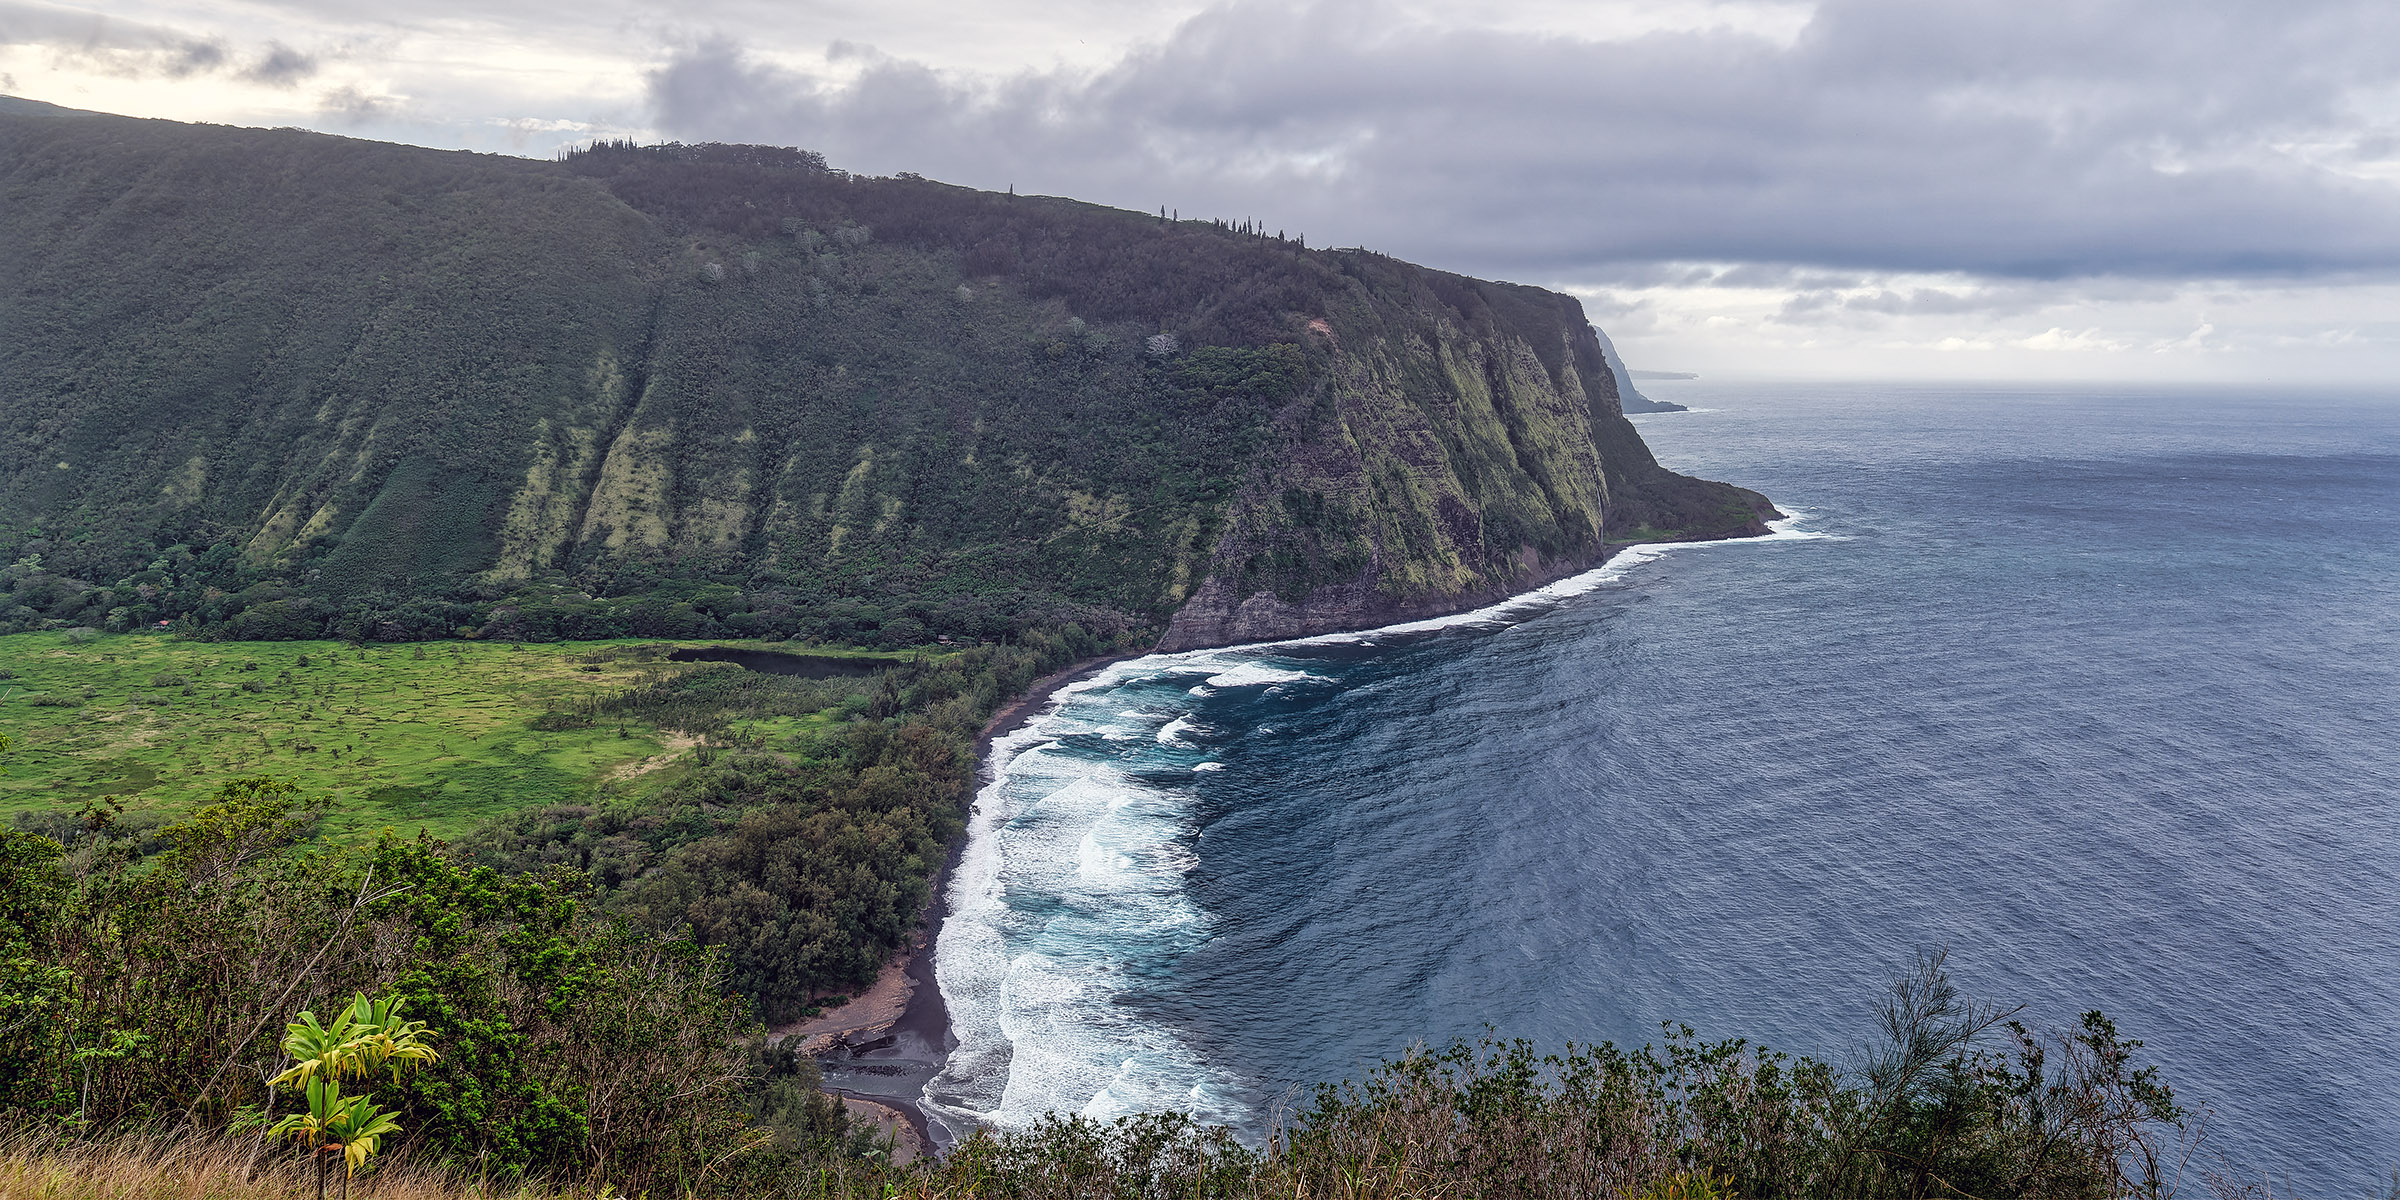 The view from the Waipi‘o Valley Lookout. Once again, we are reminded of the Irish coast, perhaps by the Cliffs of Moher